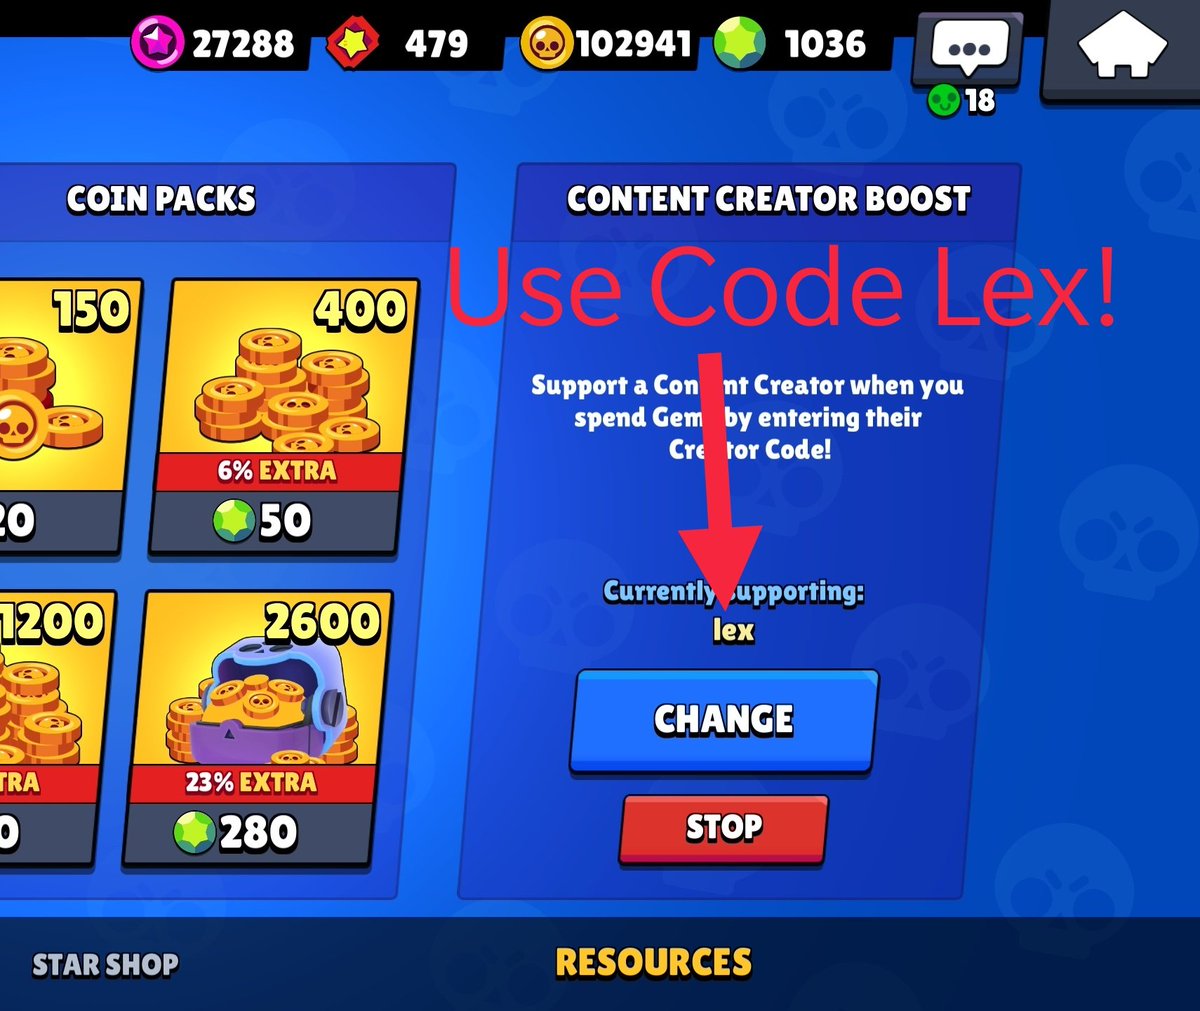 Lex On Twitter Use Code Lex Creator Codes Back In Brawlstars Just Scroll To The Right In The Shop Enter Lex And You Re Garunteed Free Legendary Brawlers So That Last Part Isn T - brawl stars gemmes paysafecard